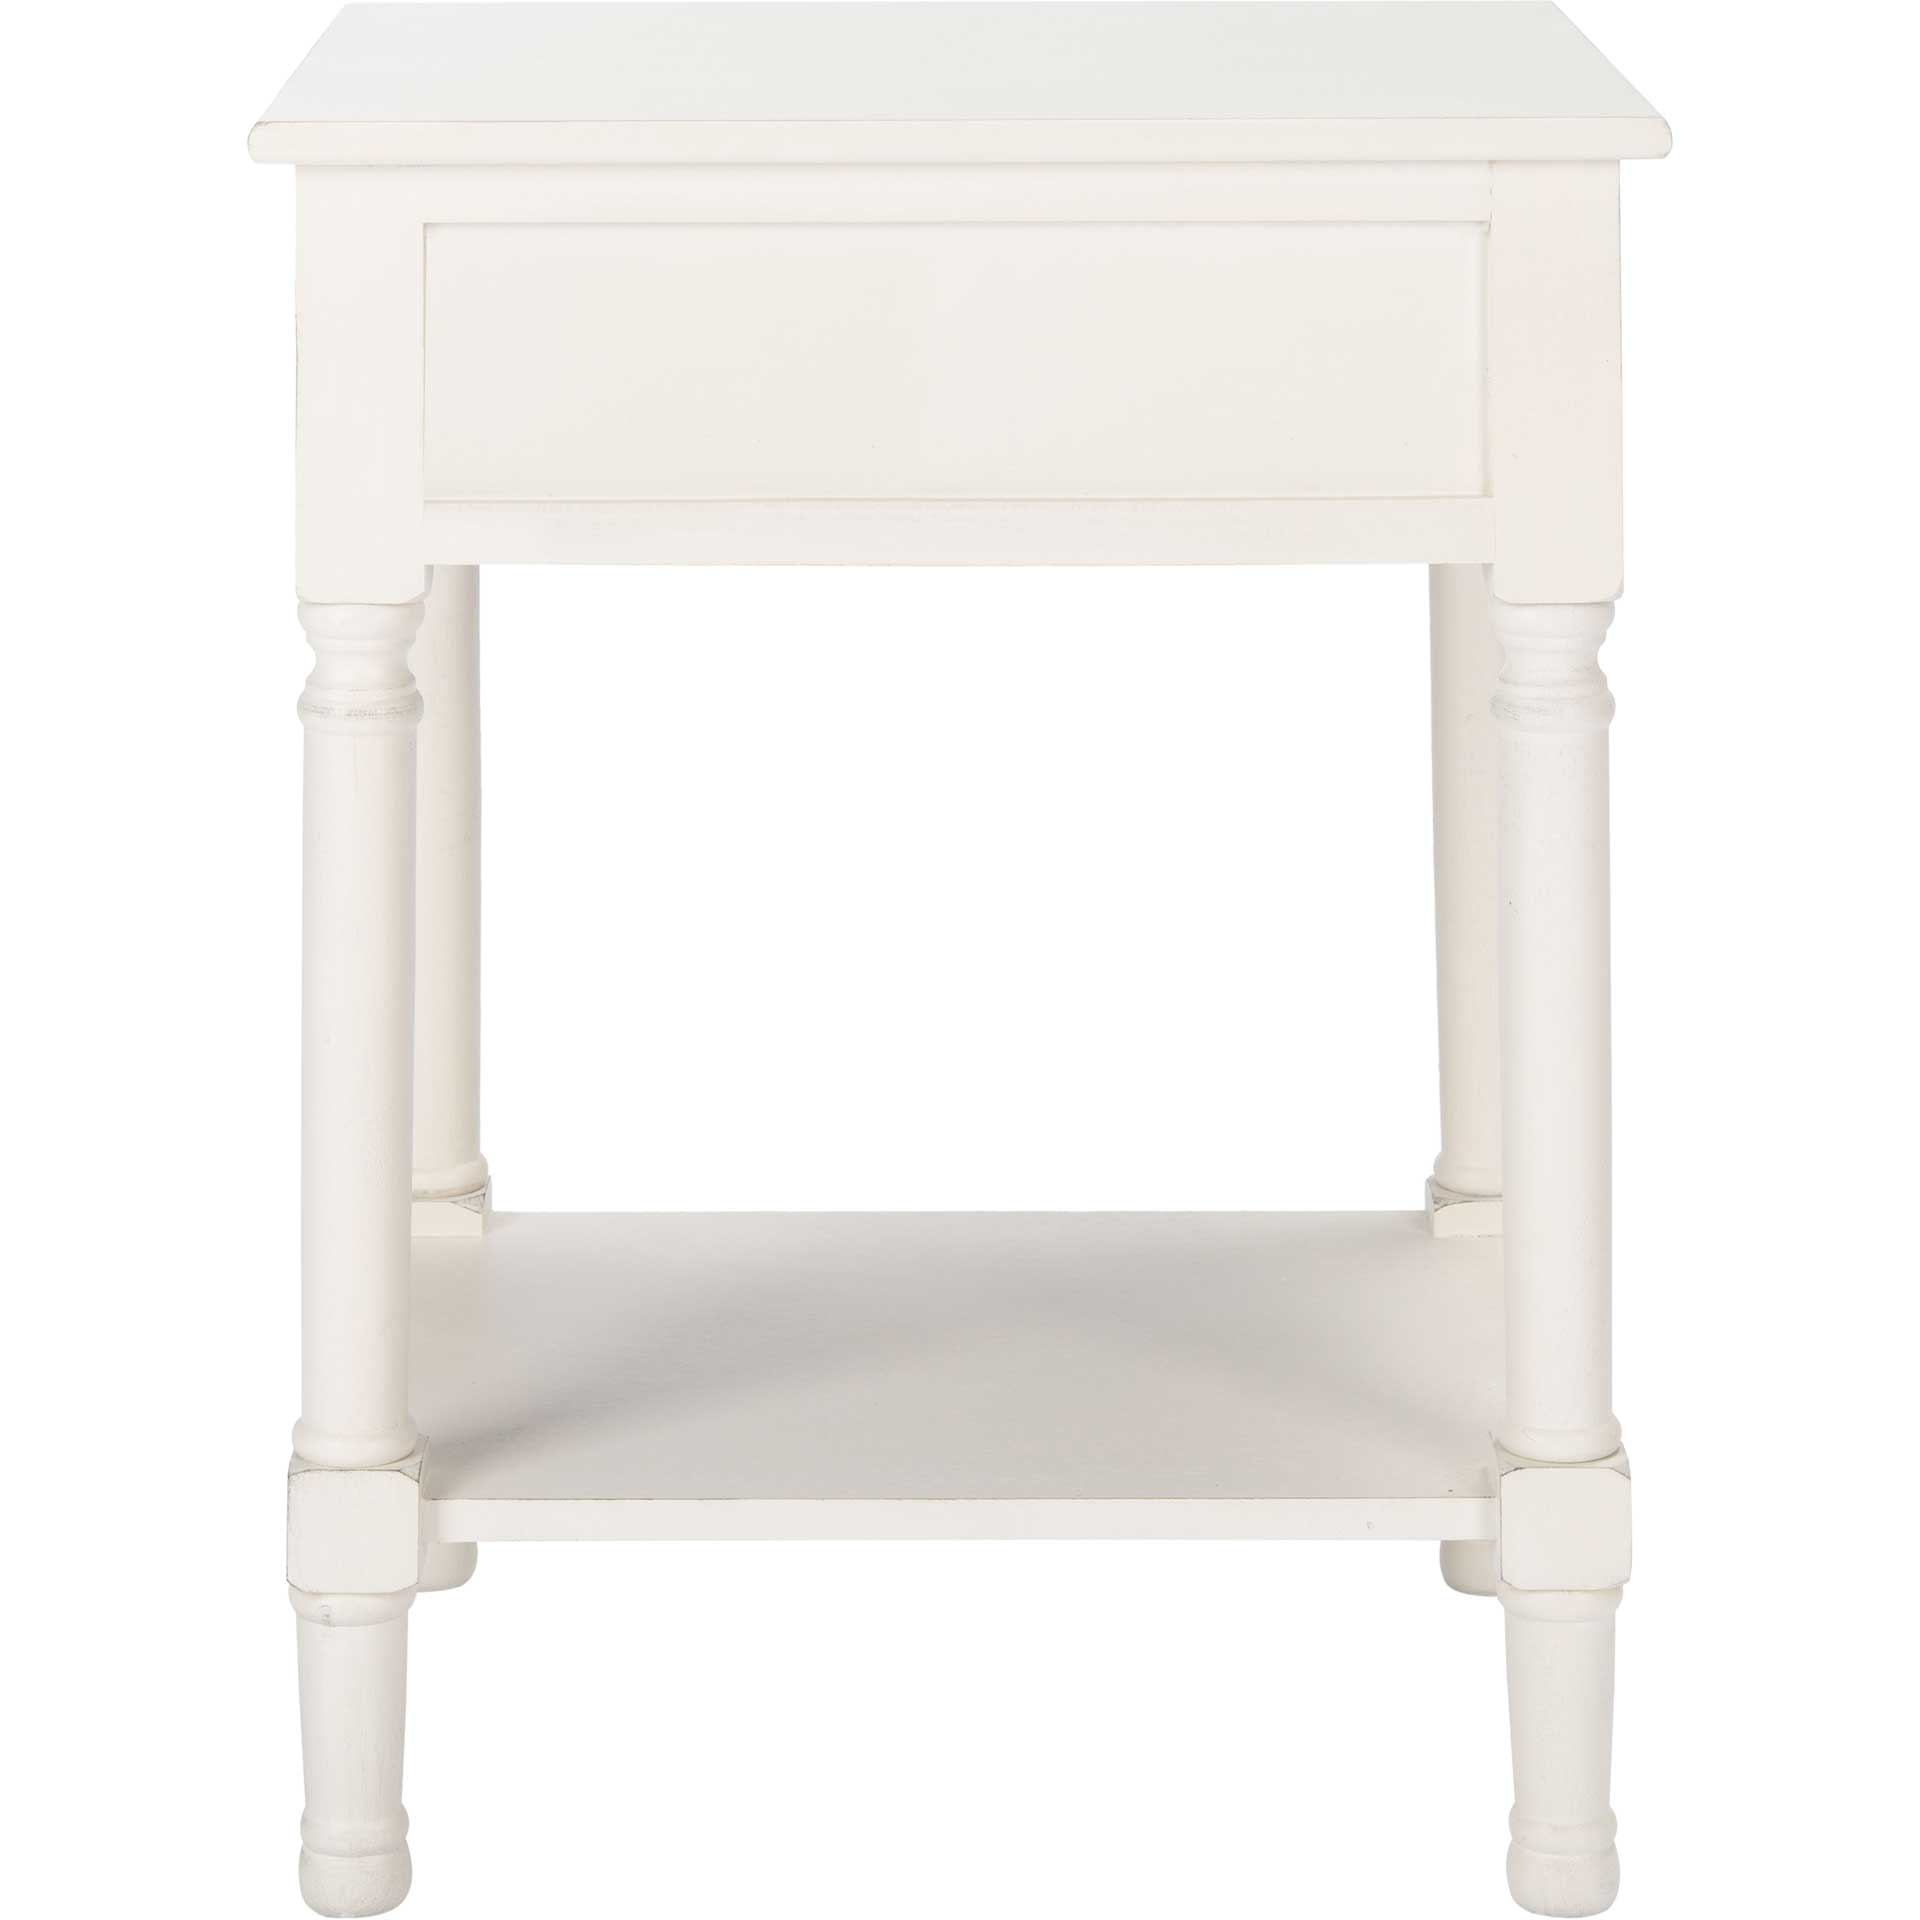 Alessa 1 Drawer Accent Table Distressed White